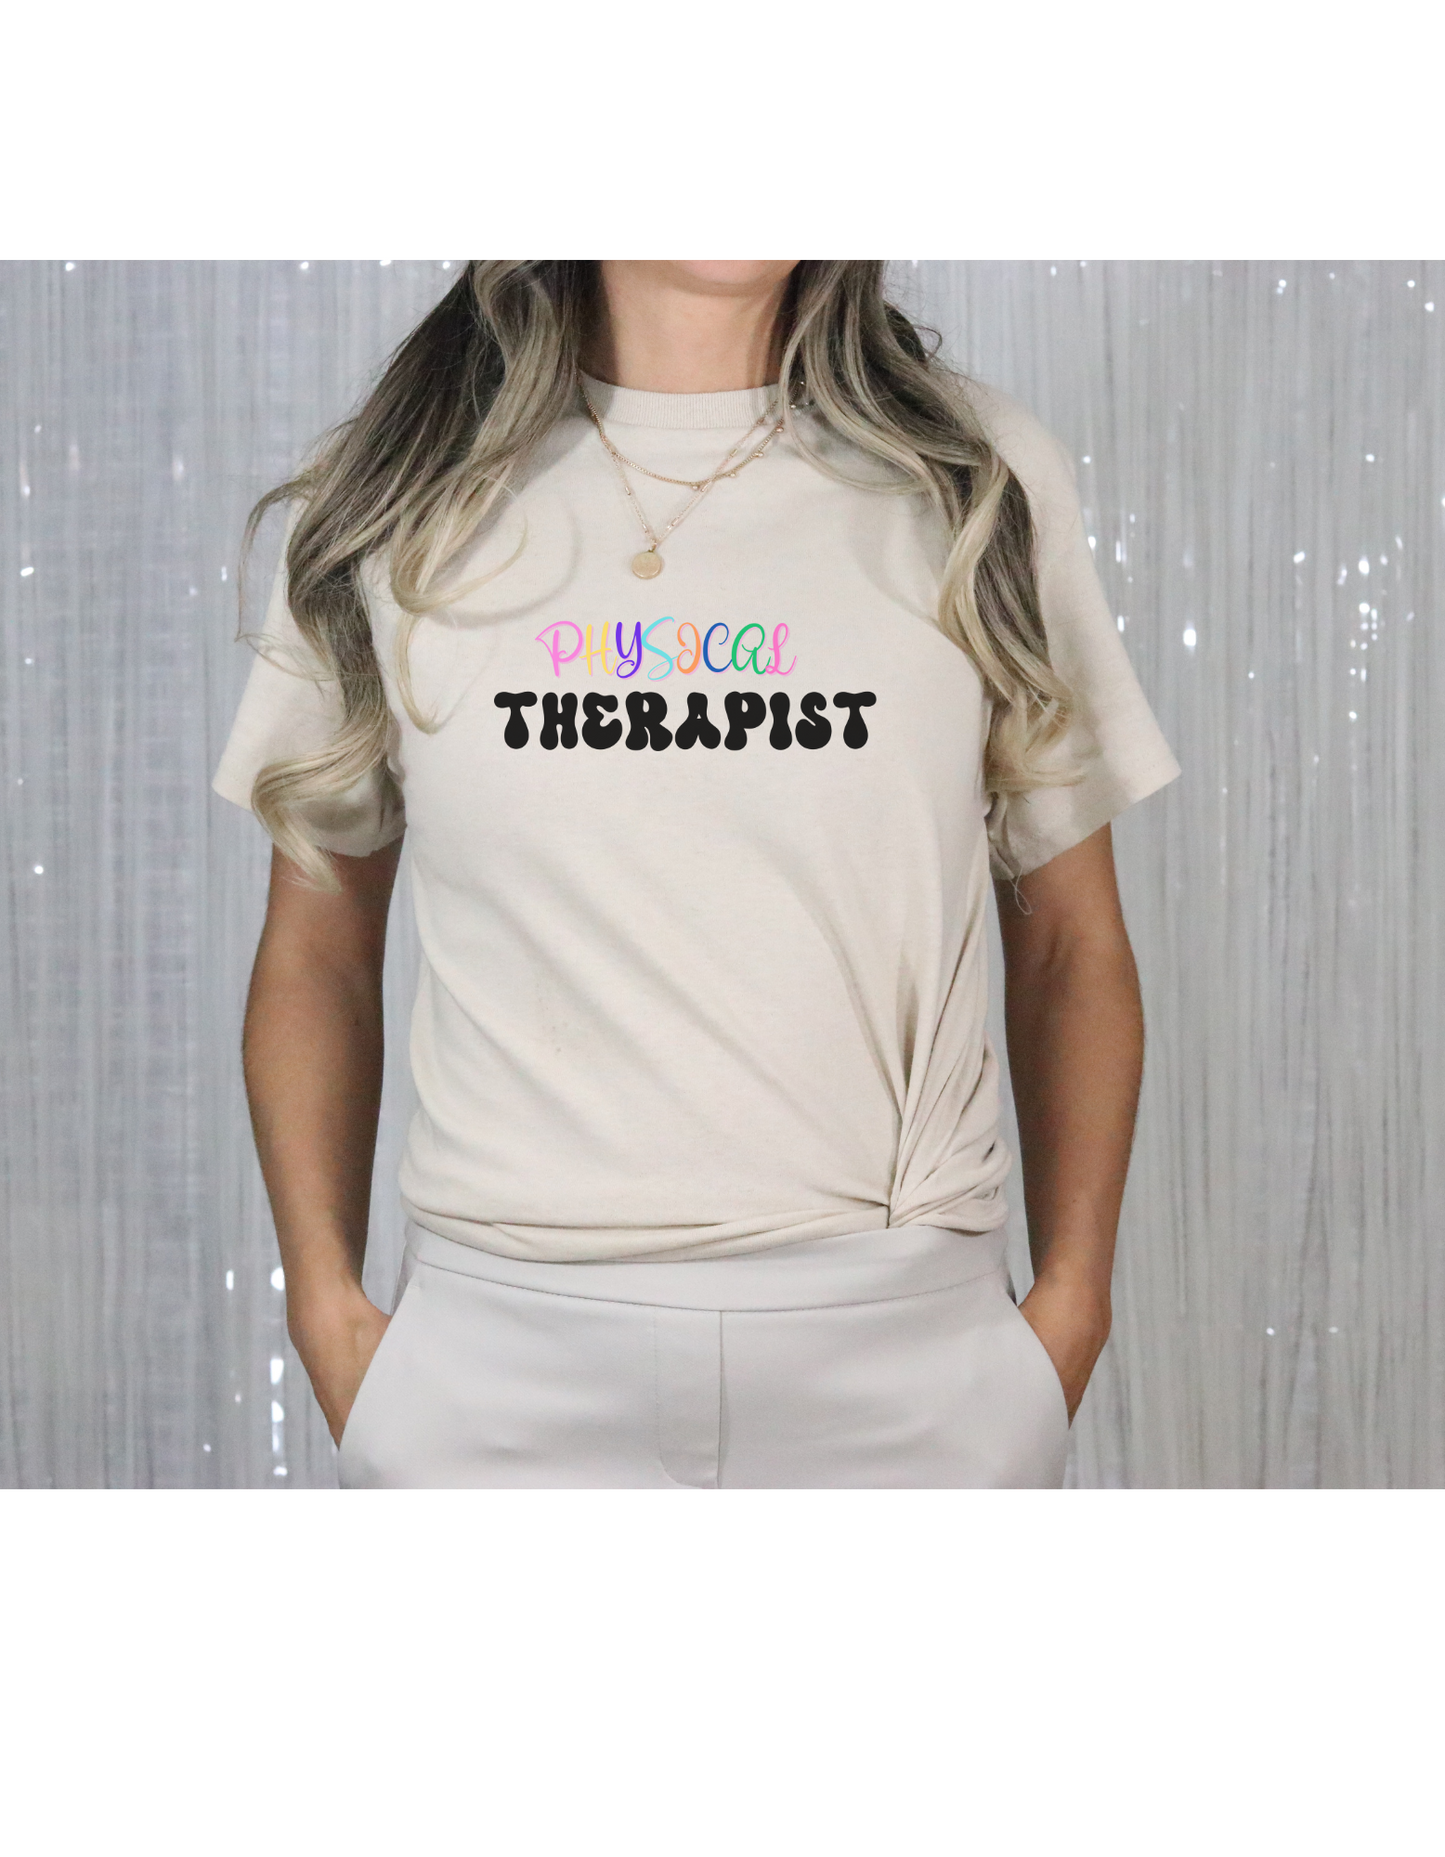 Physical Therapist T-Shirt, PT Gift, Physical Therapy Shirt, Gift for PT, Therapy Tee